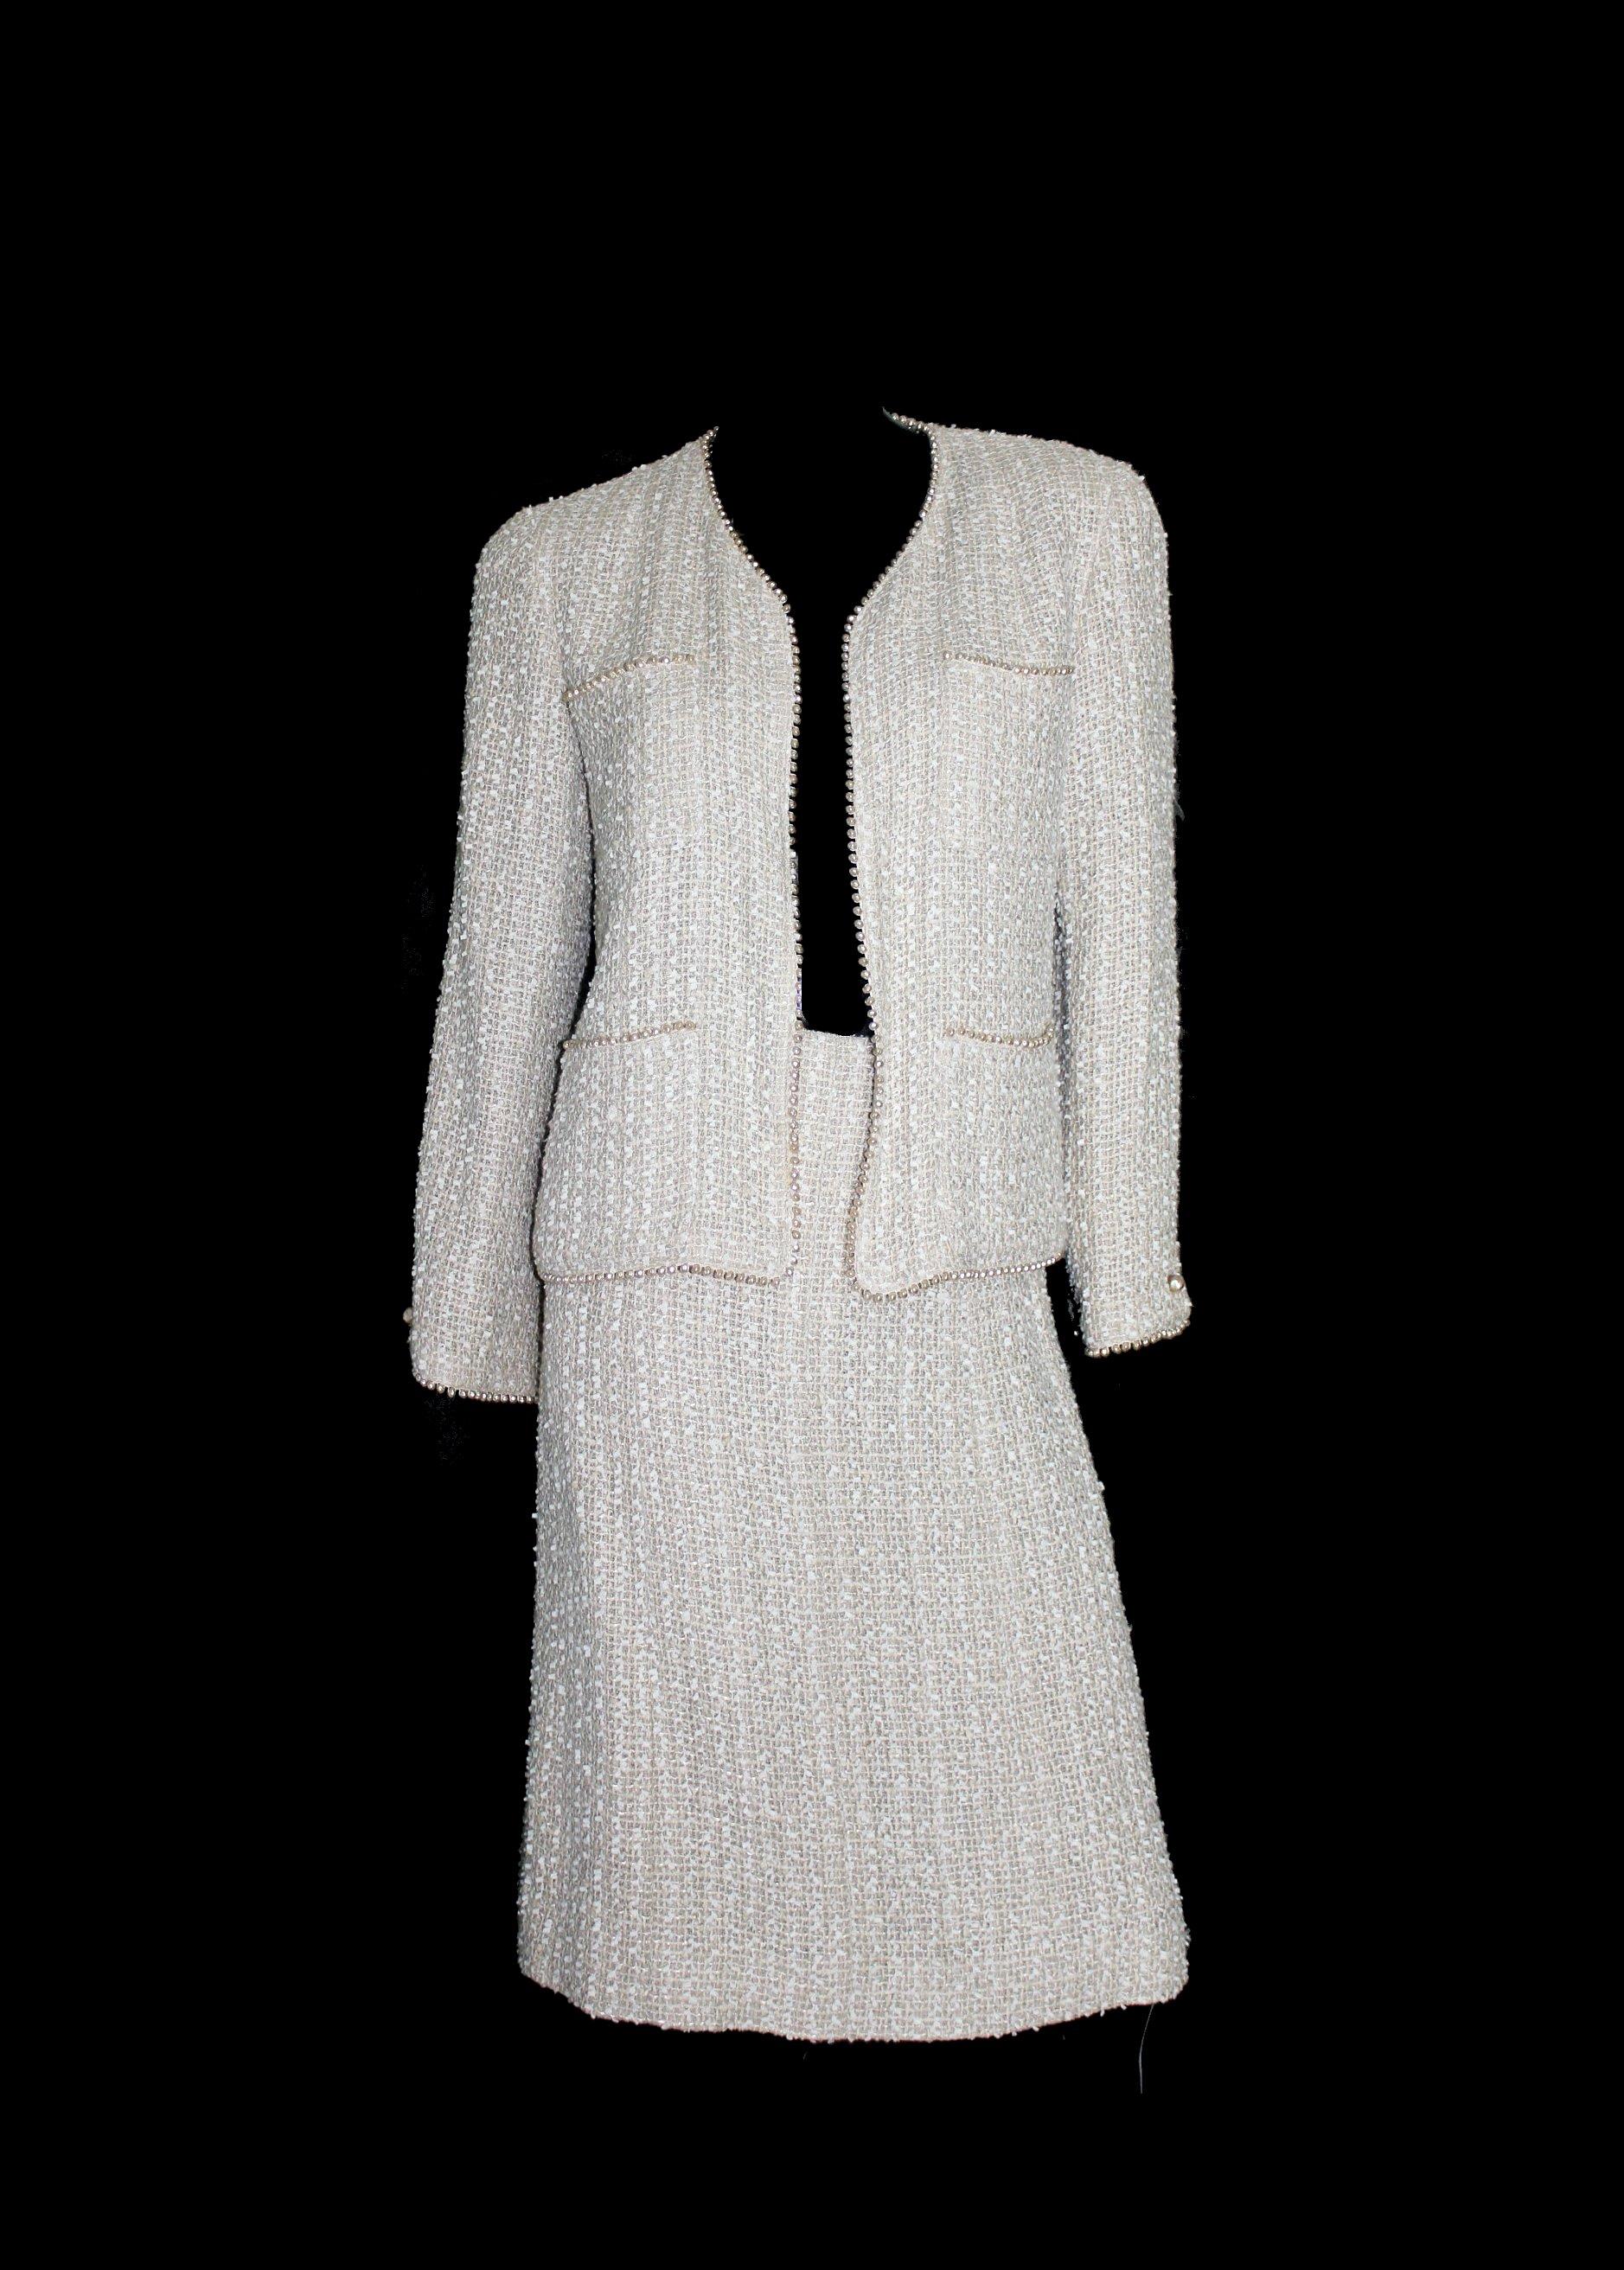 Gray Amazing Chanel Ivory Fantasy Tweed Skirt Suit with Pearl Trimming Details